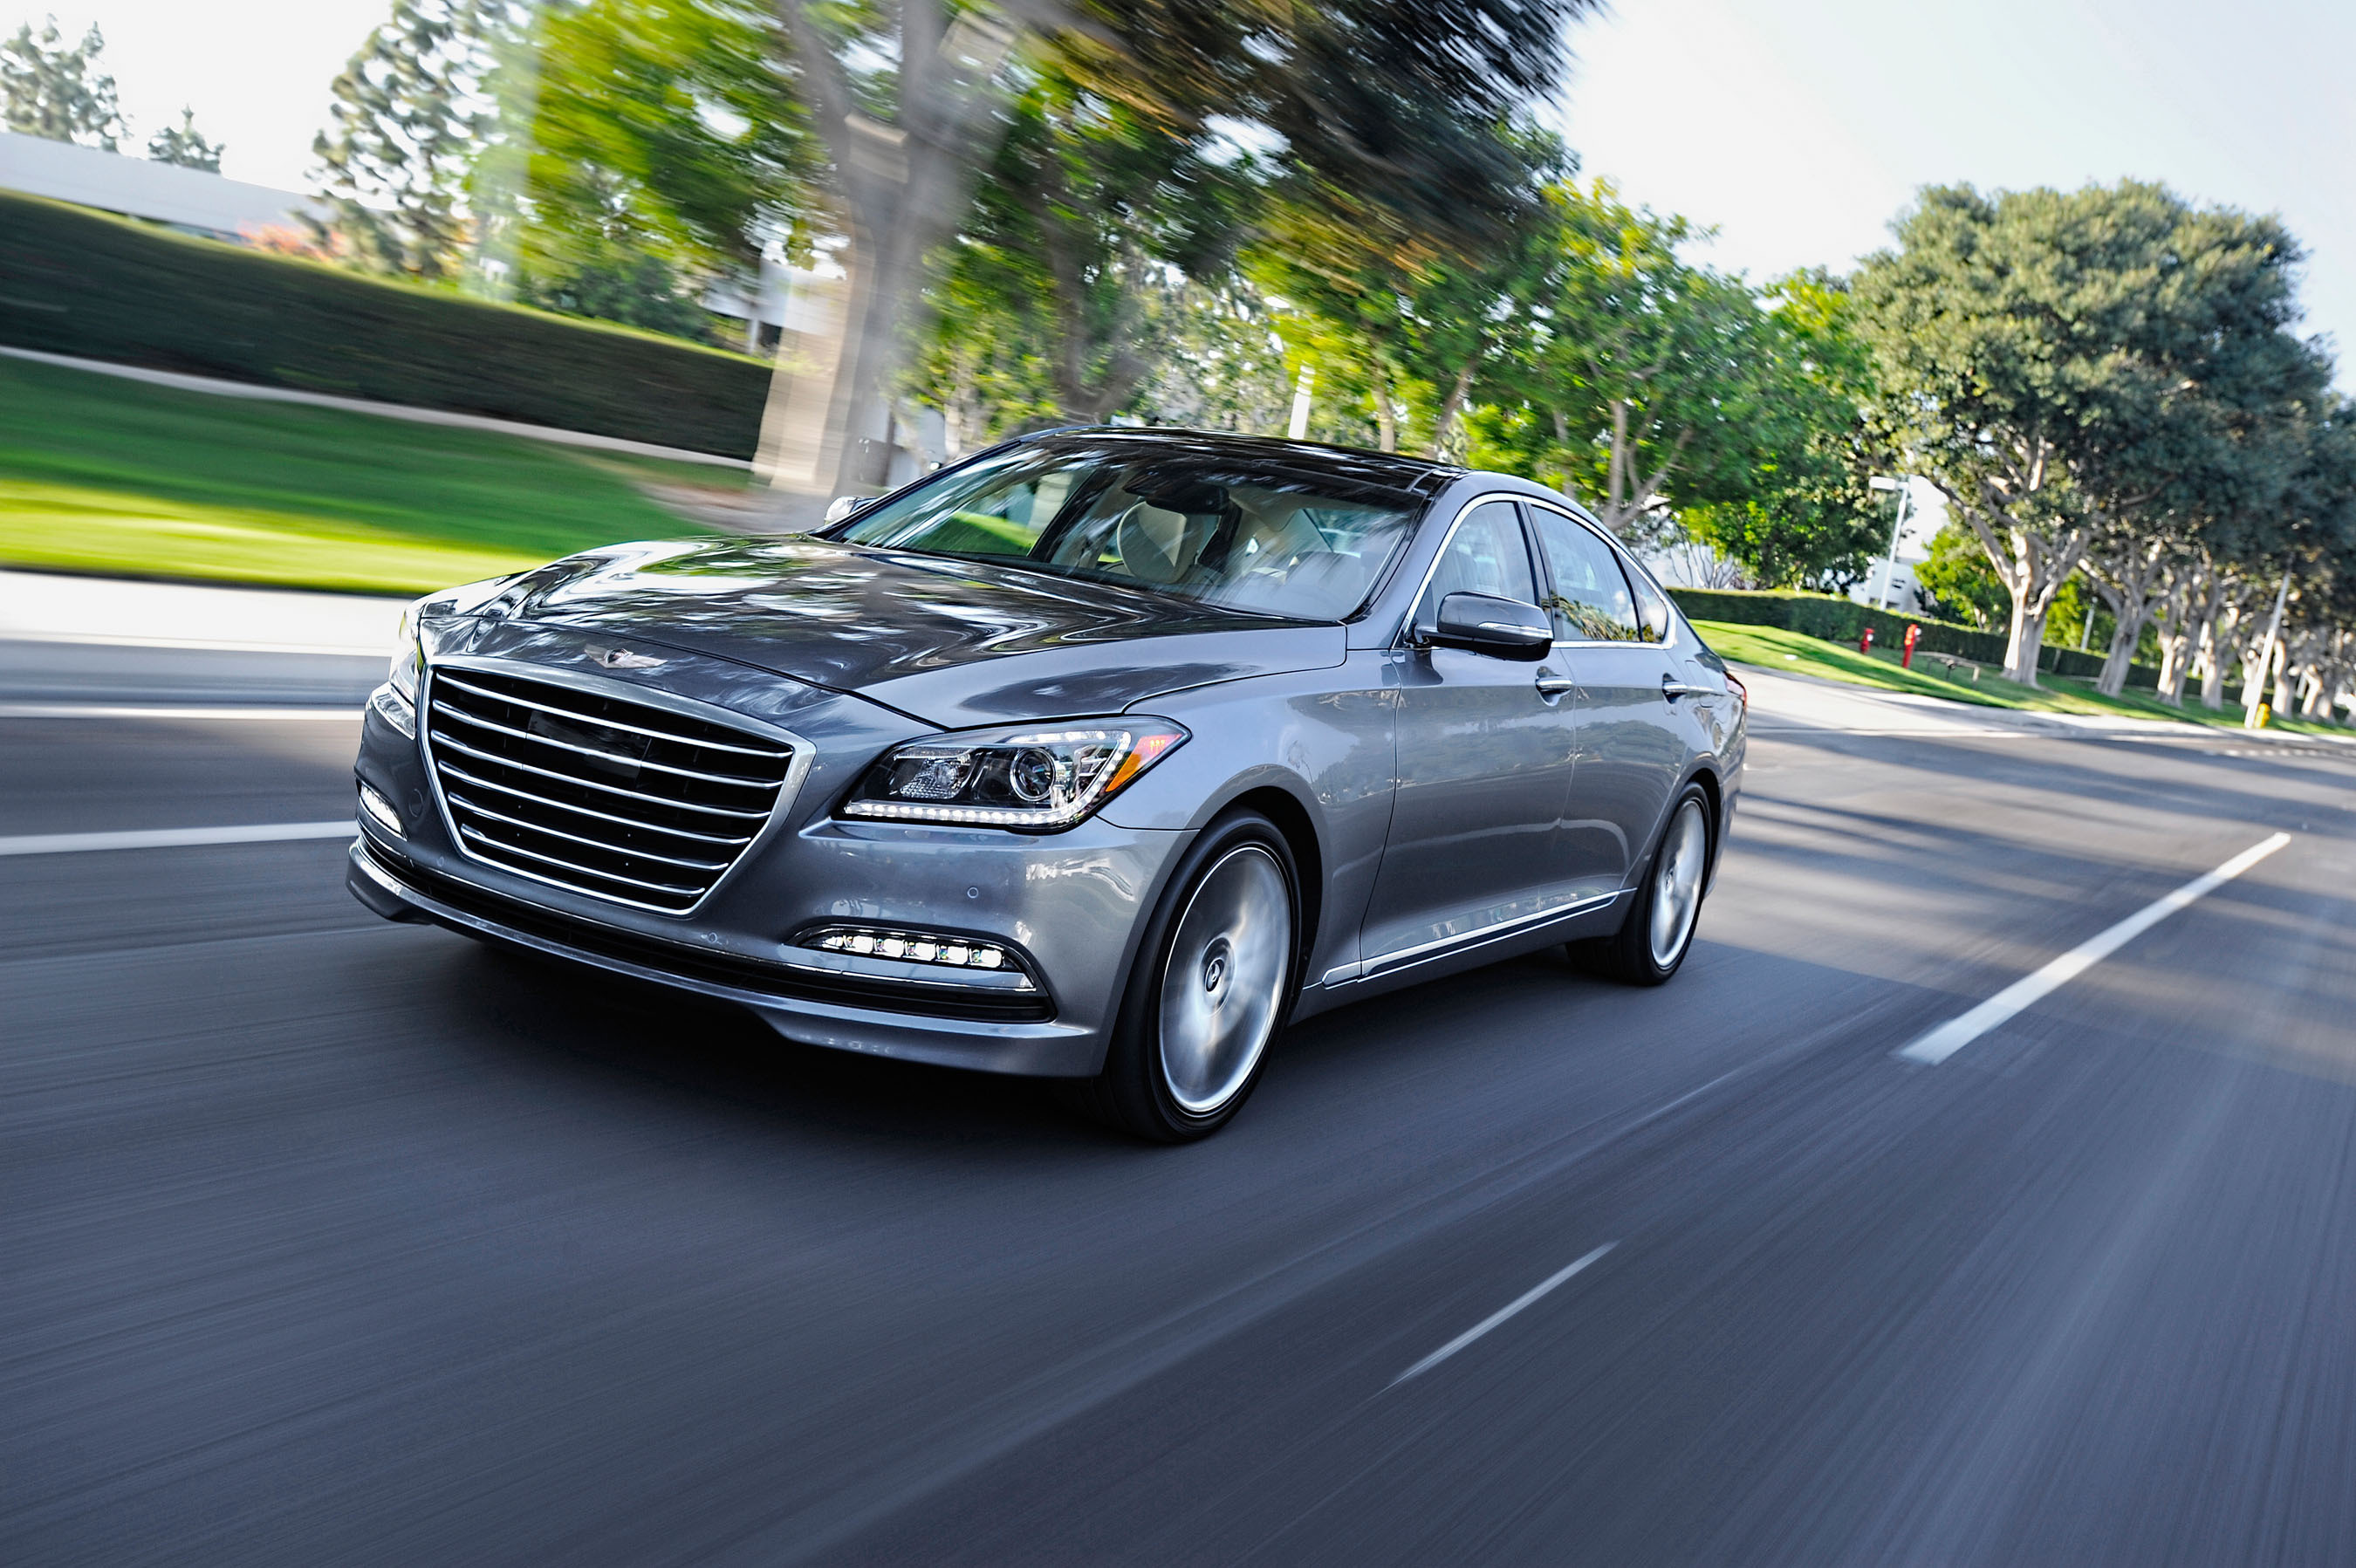 ALL-NEW 2015 HYUNDAI GENESIS DELIVERS GENEROUS PREMIUM CONTENT FOR AN OUTSTANDING VALUE POSITION. (PRNewsFoto/Hyundai Motor America) (PRNewsFoto/HYUNDAI MOTOR AMERICA)